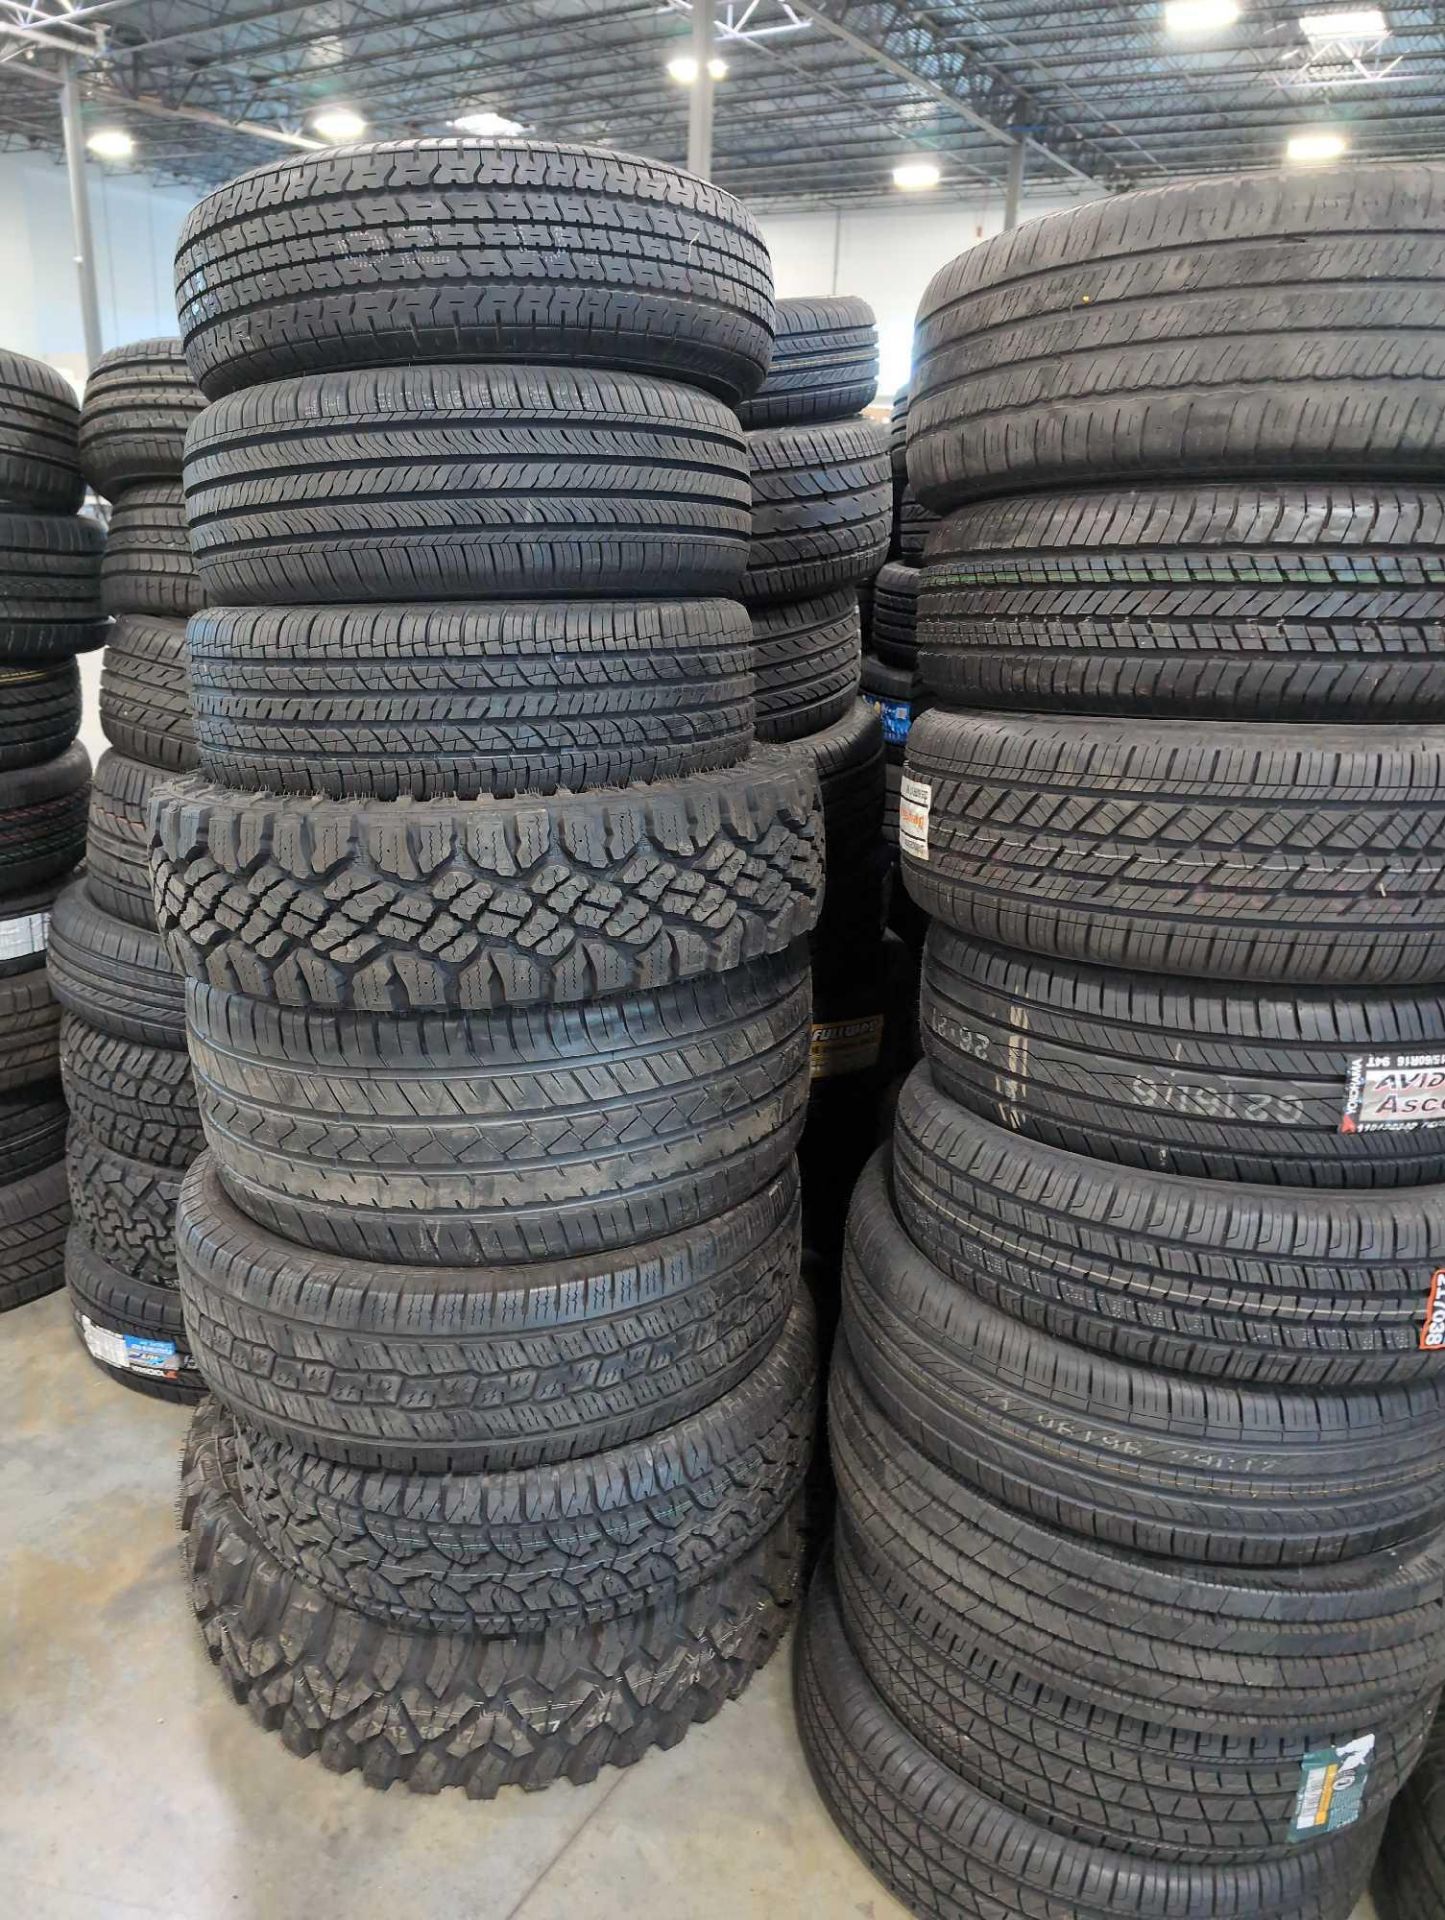 Approx 300 Tires - Image 40 of 48